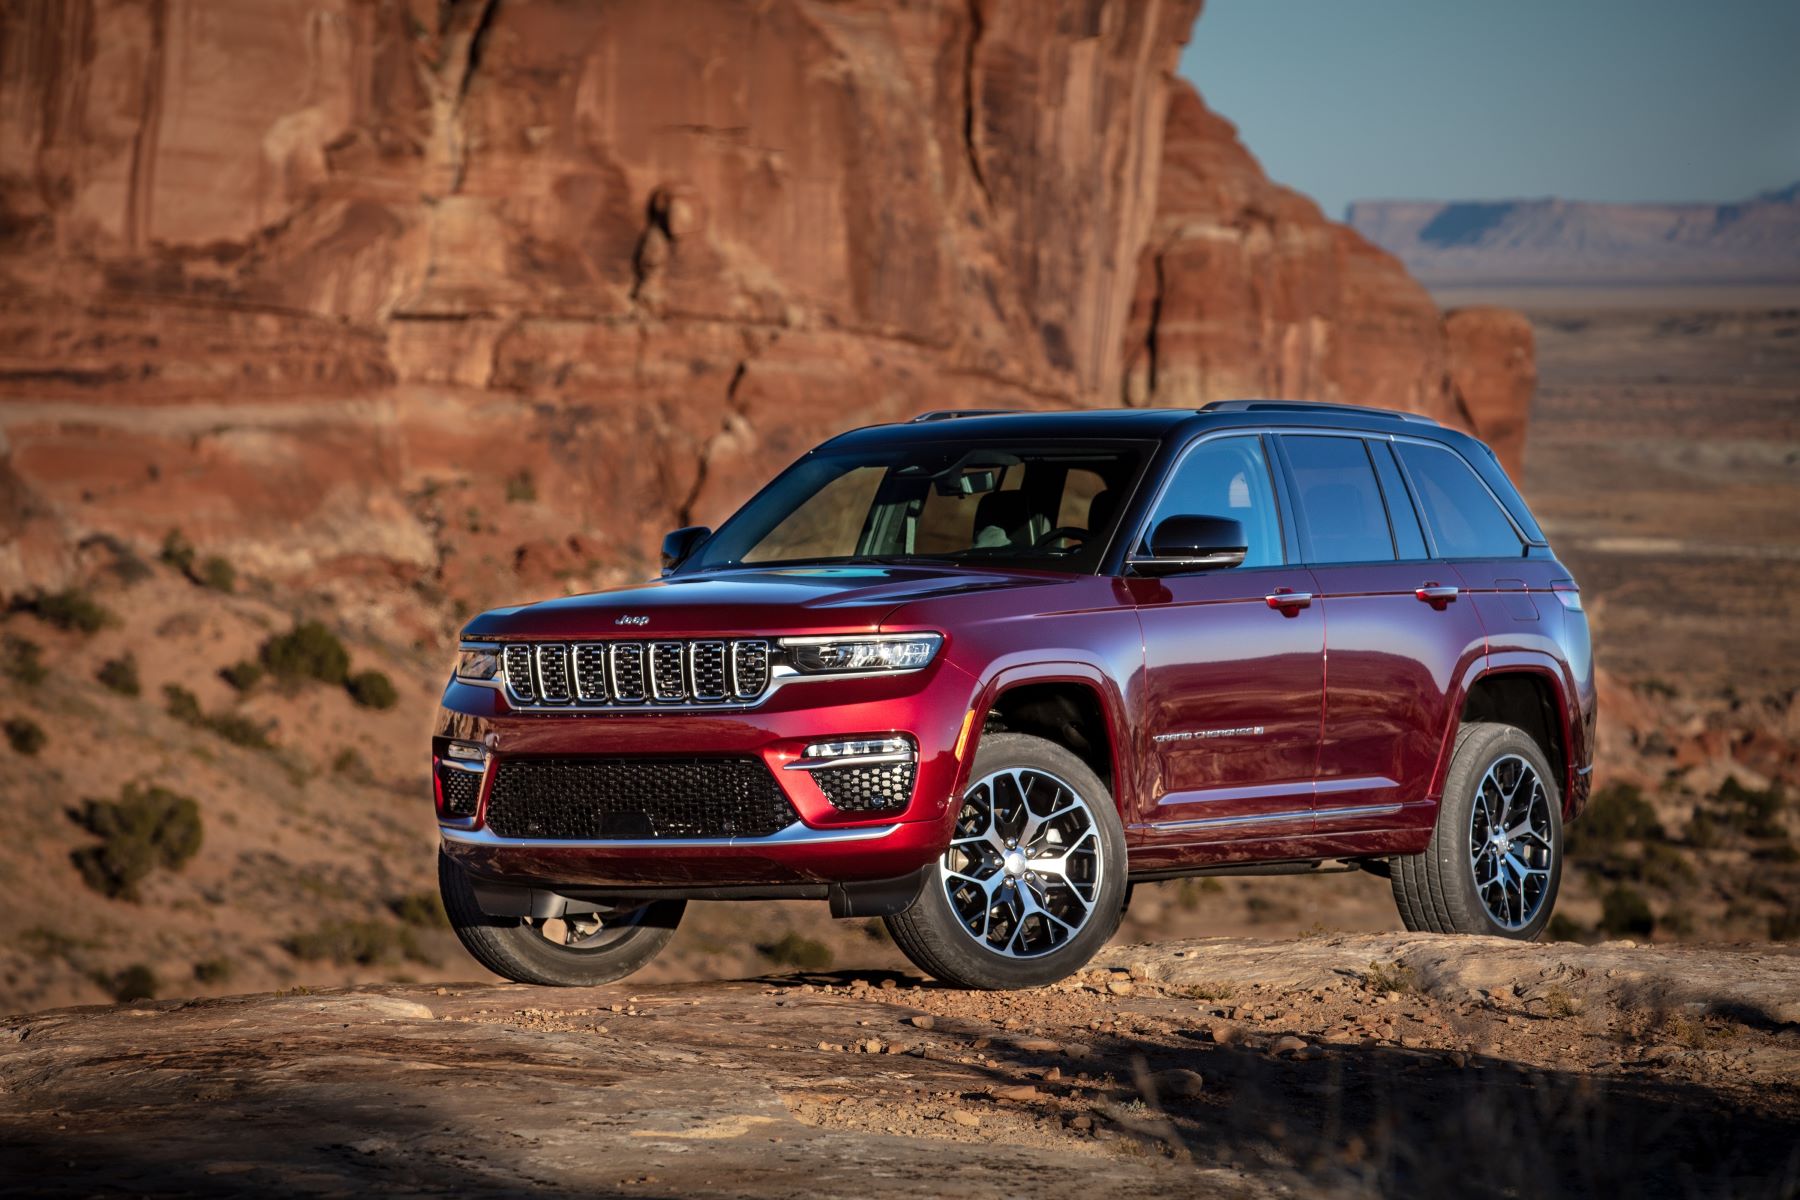 Red 2023 Jeep Grand Cherokee Summit Reserve midsize SUV model parked on desert rocky terrain near red cliffs